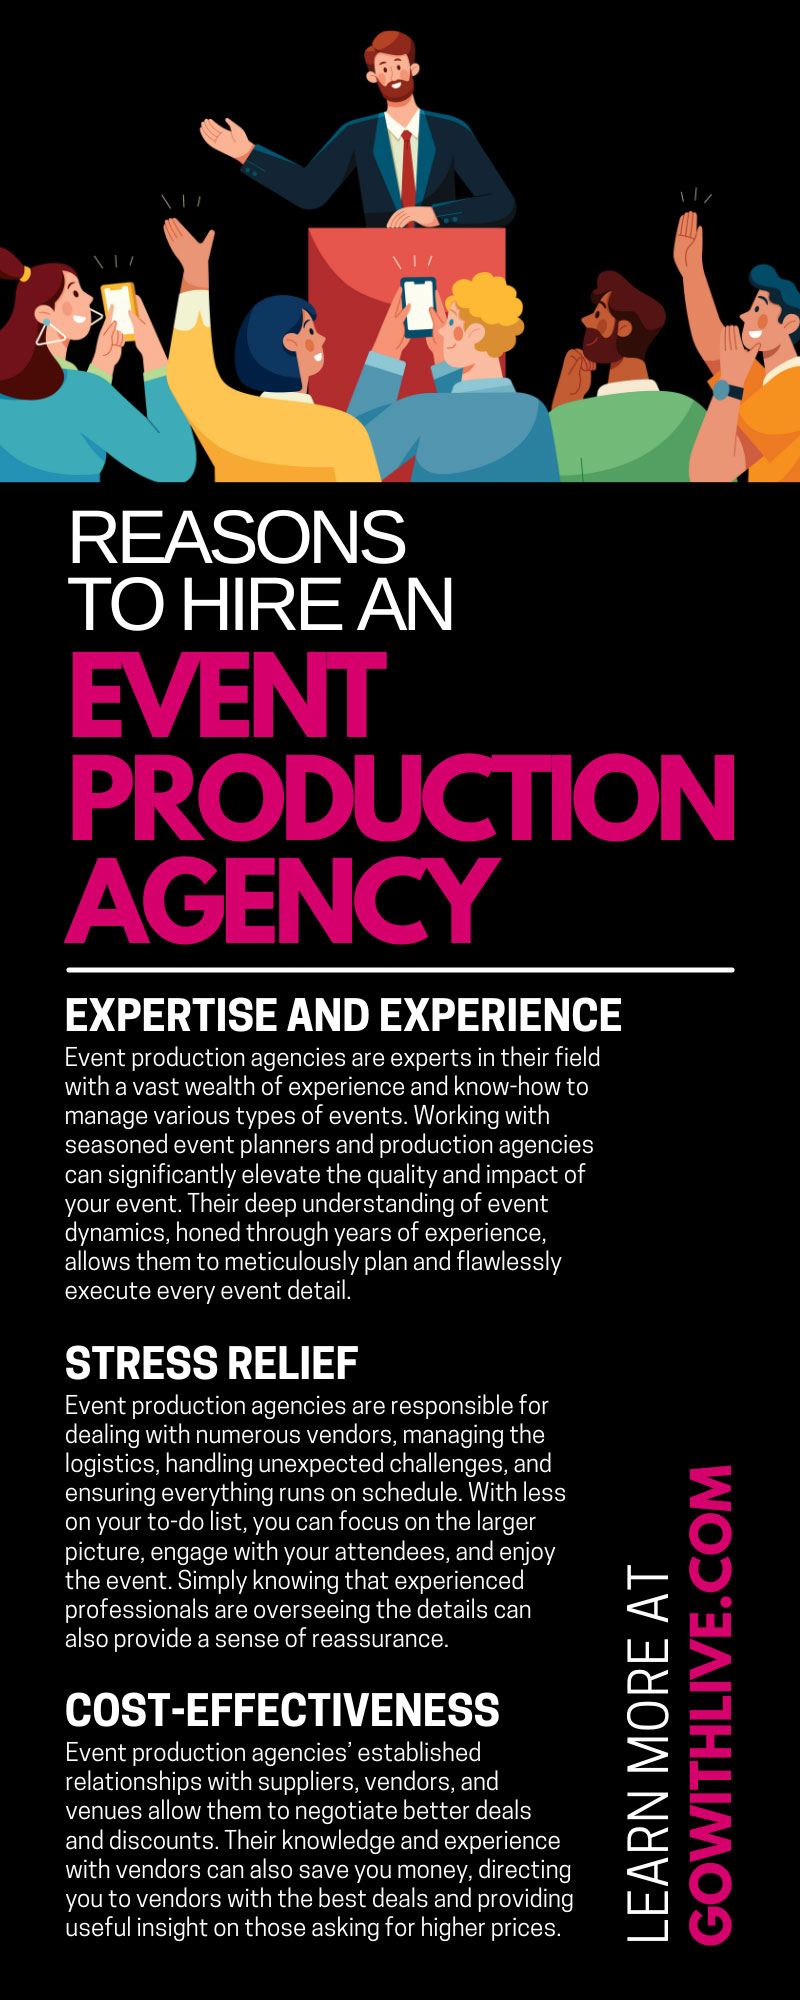 7 Reasons to Hire an Event Production Agency